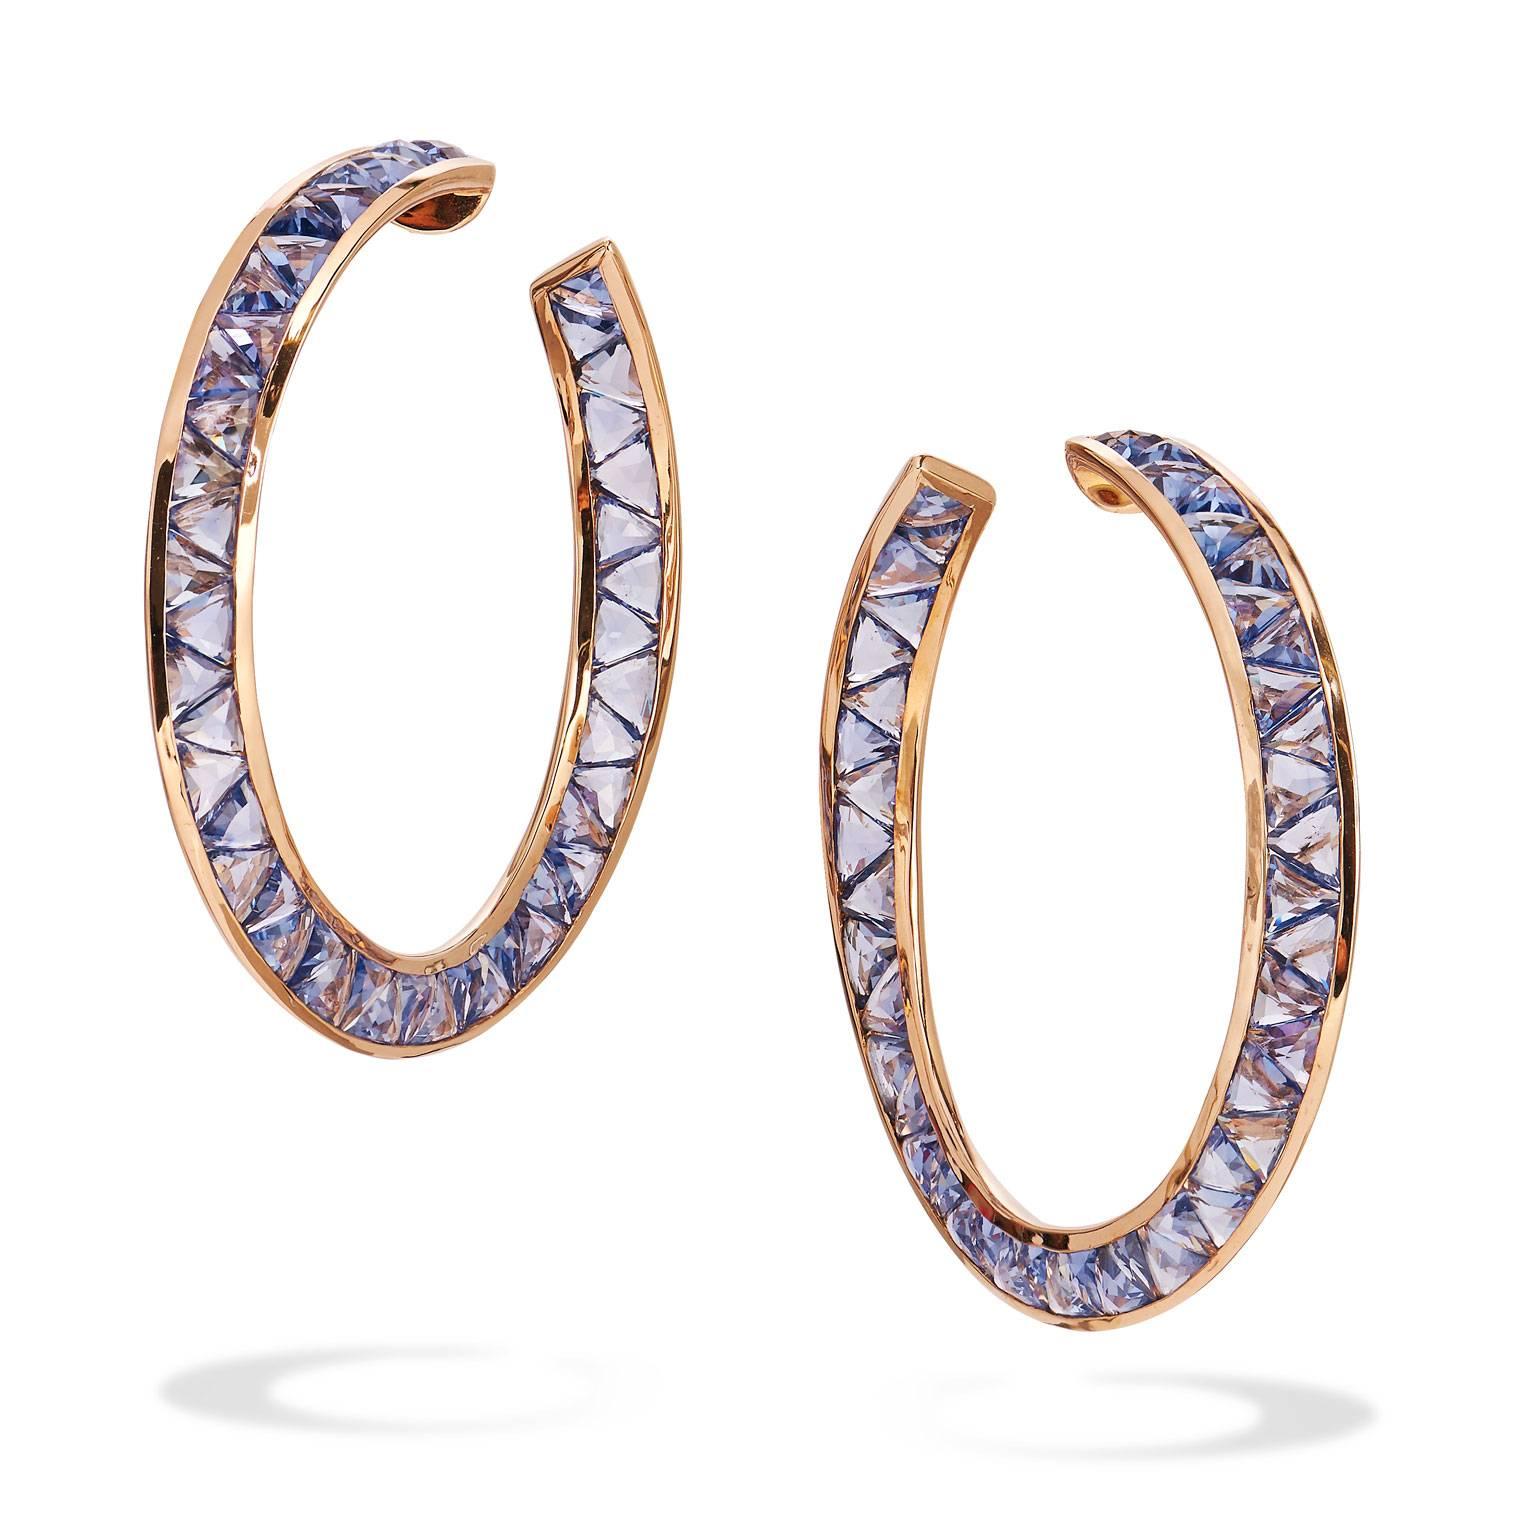 Enjoy these previously loved 18 karat rose gold hoops featuring ninety-two pieces of light blue/purple sapphires resulting in 22.10 carat in total weight. The earrings are 50 mm diameter.